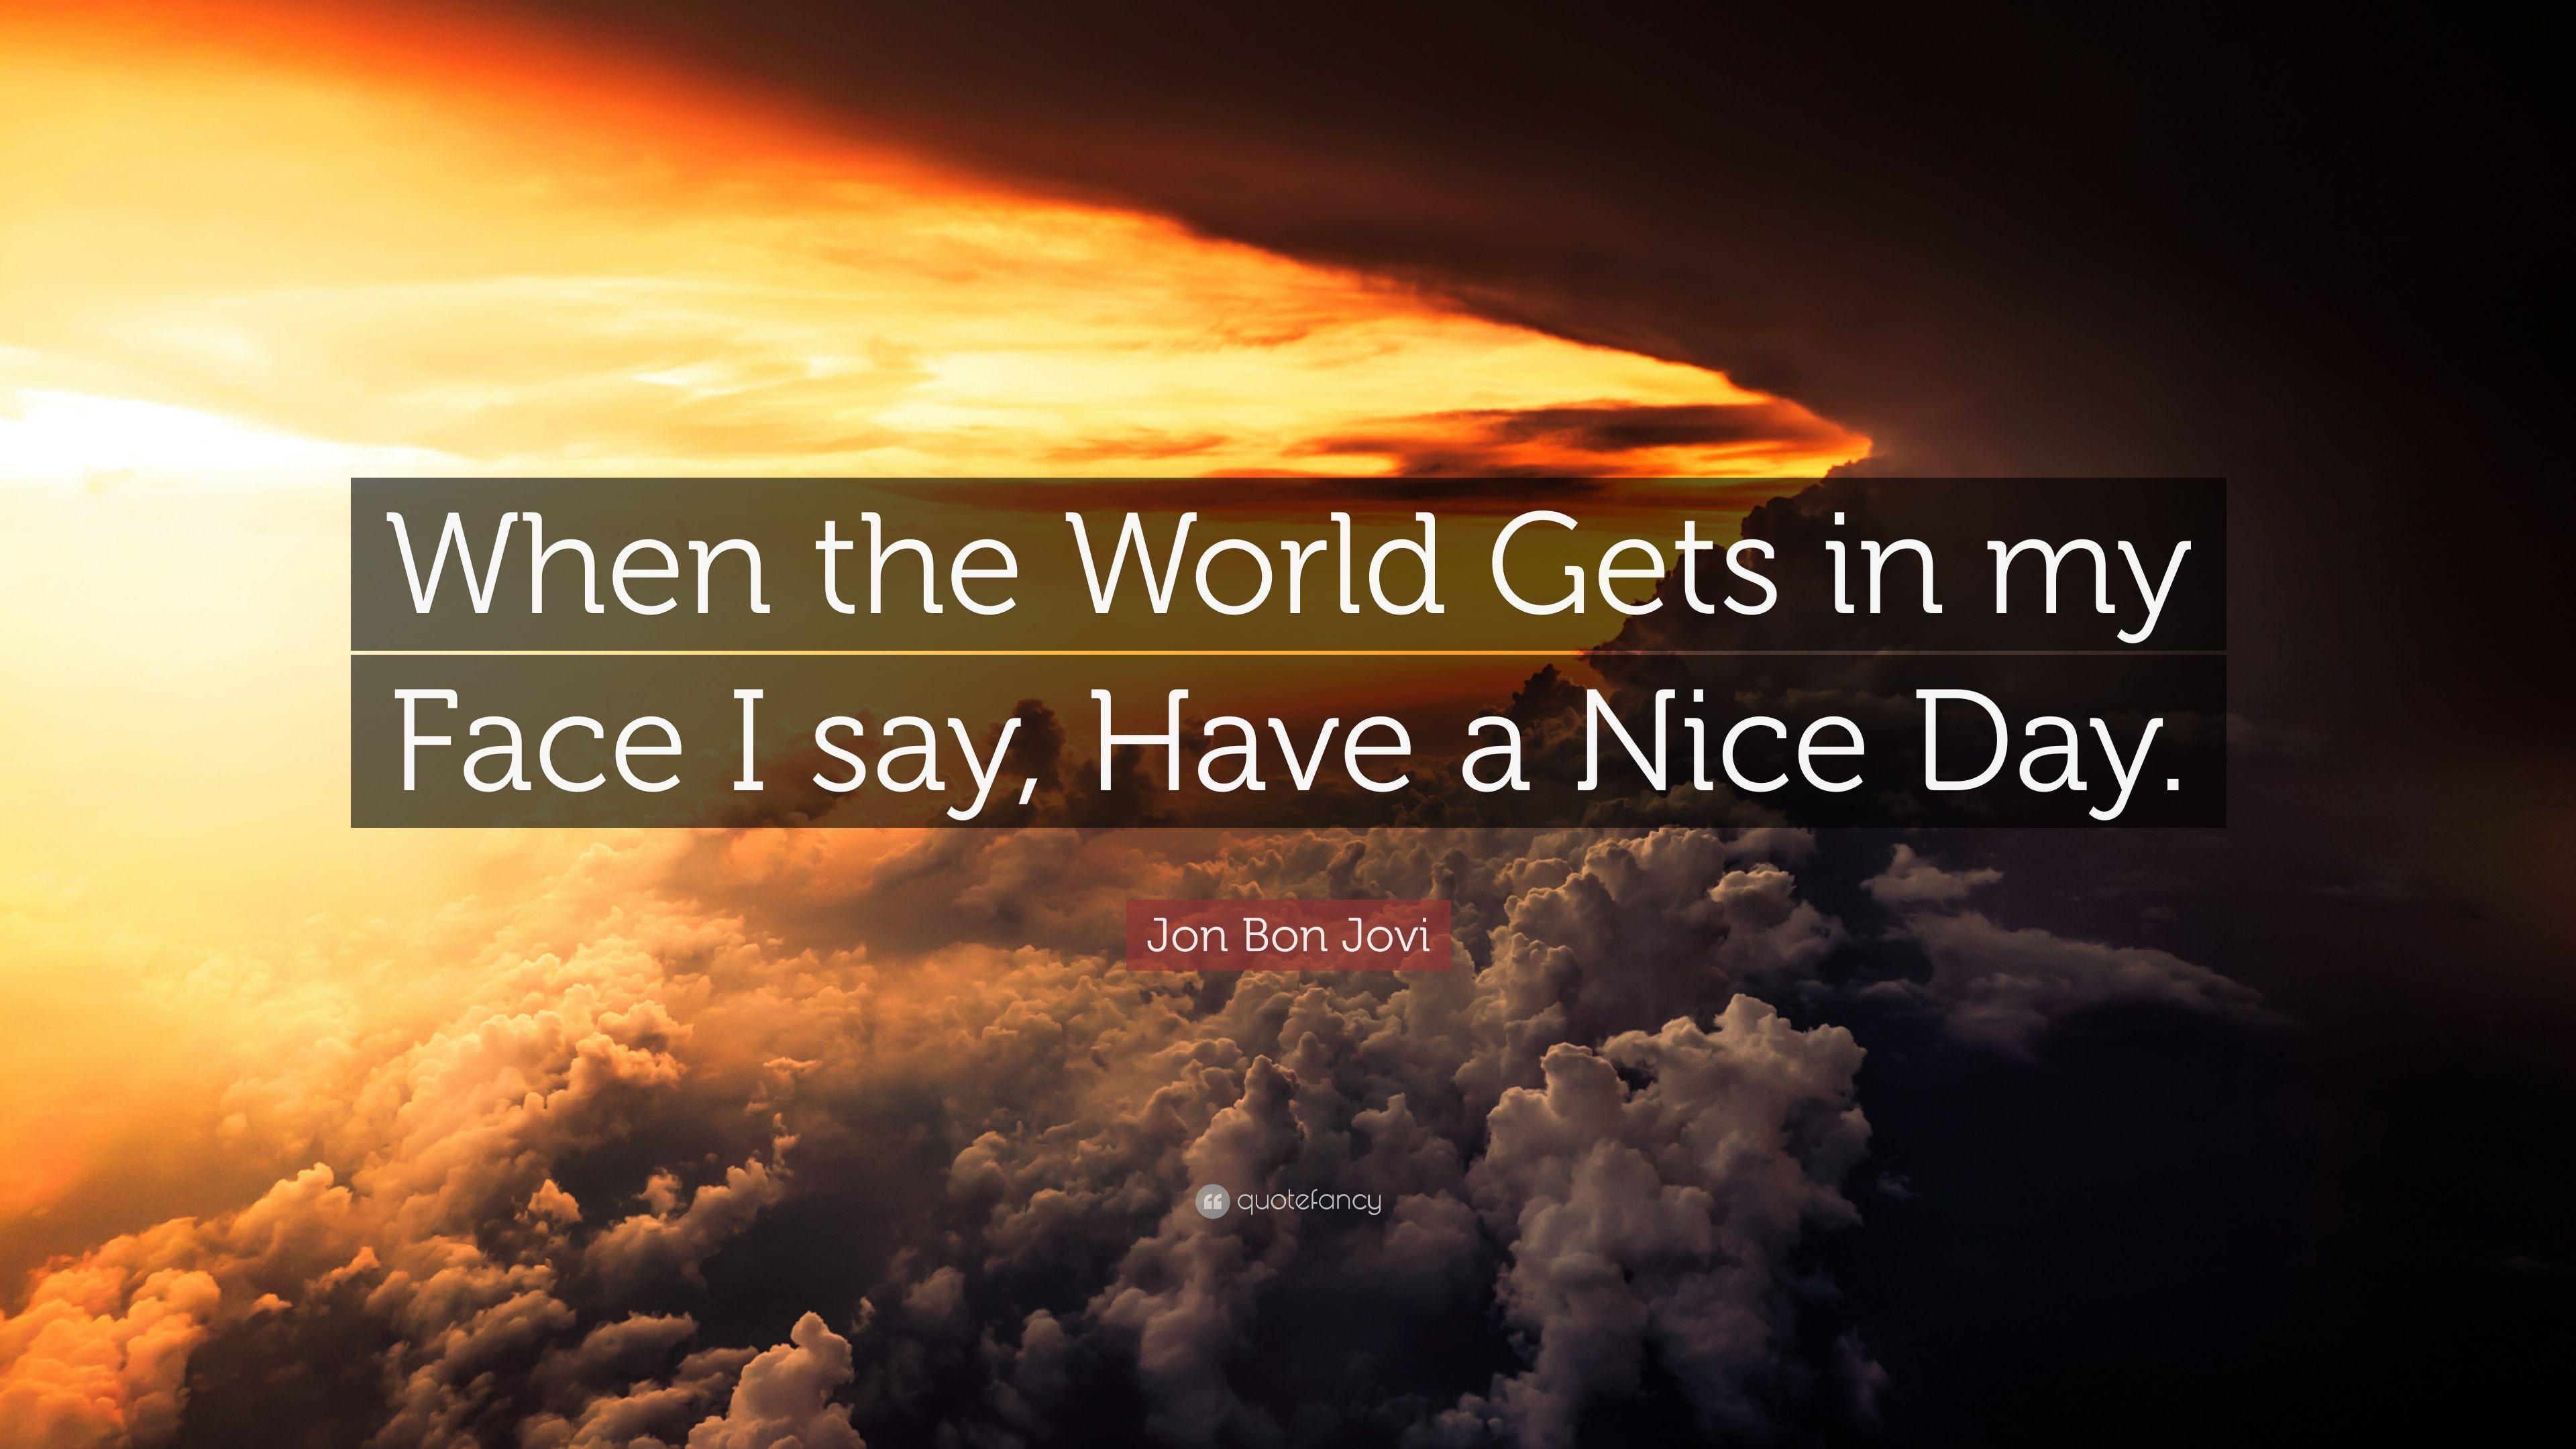 Jon Bon Jovi Quote: “When the World Gets in my Face I say, Have a